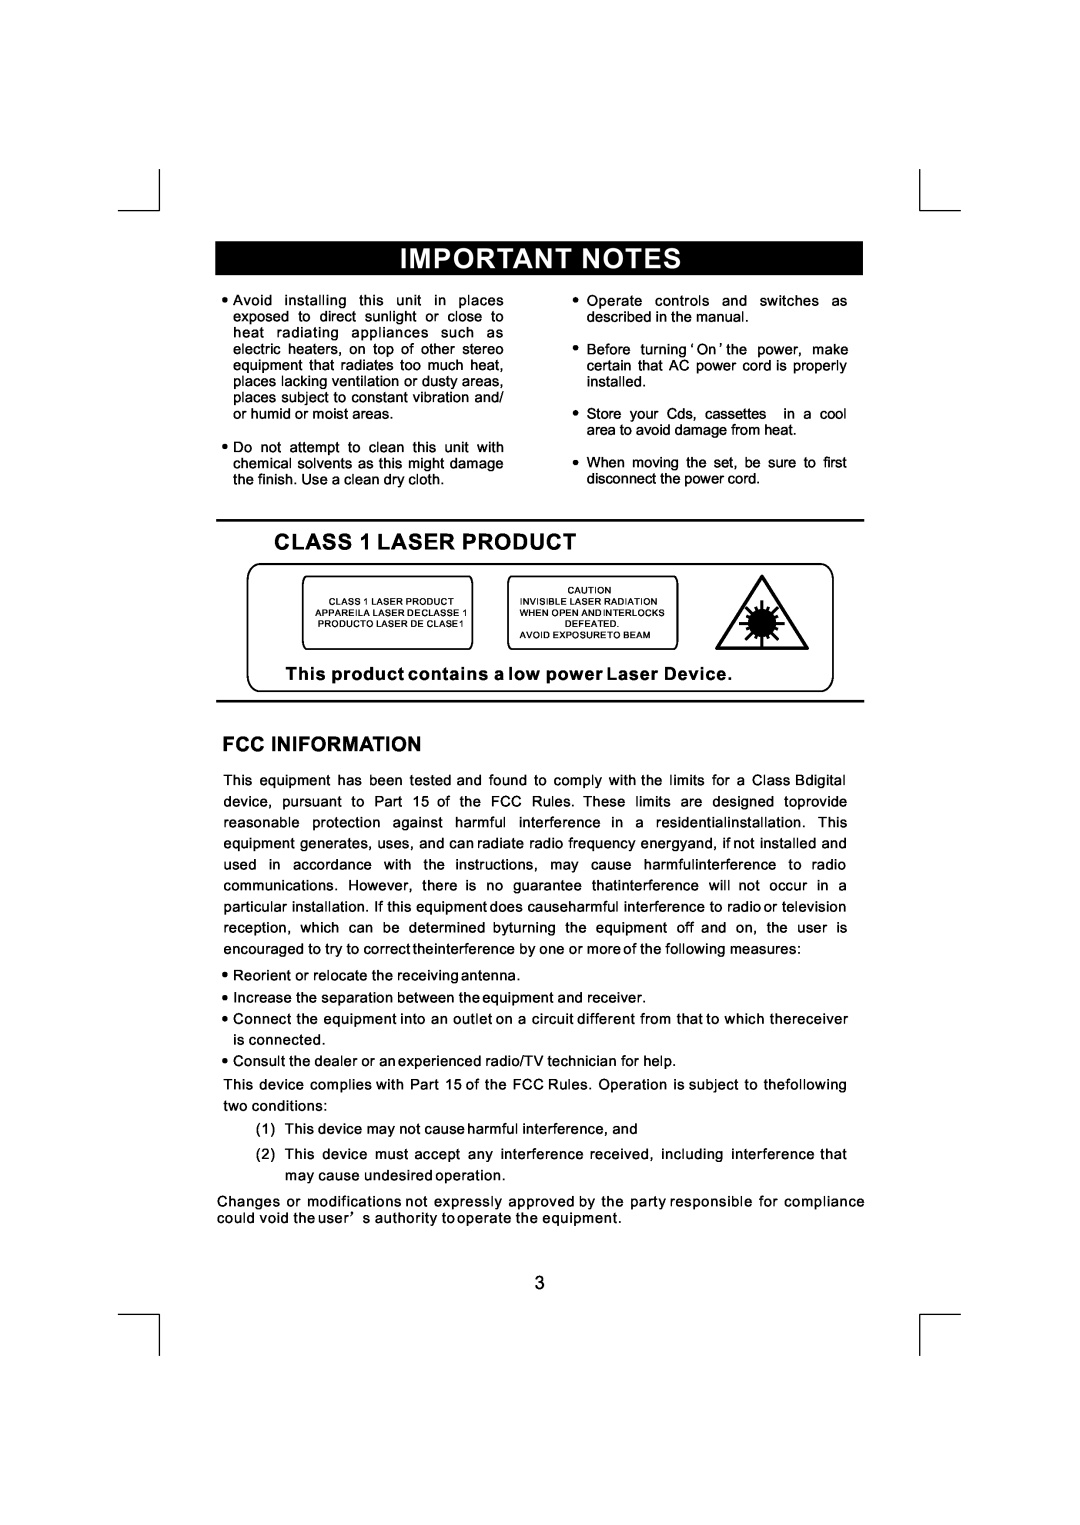 Emerson NR290TTC Important Notes, CLASS 1 LASER PRODUCT, Fcc Iniformation, This product contains a low power Laser Device 